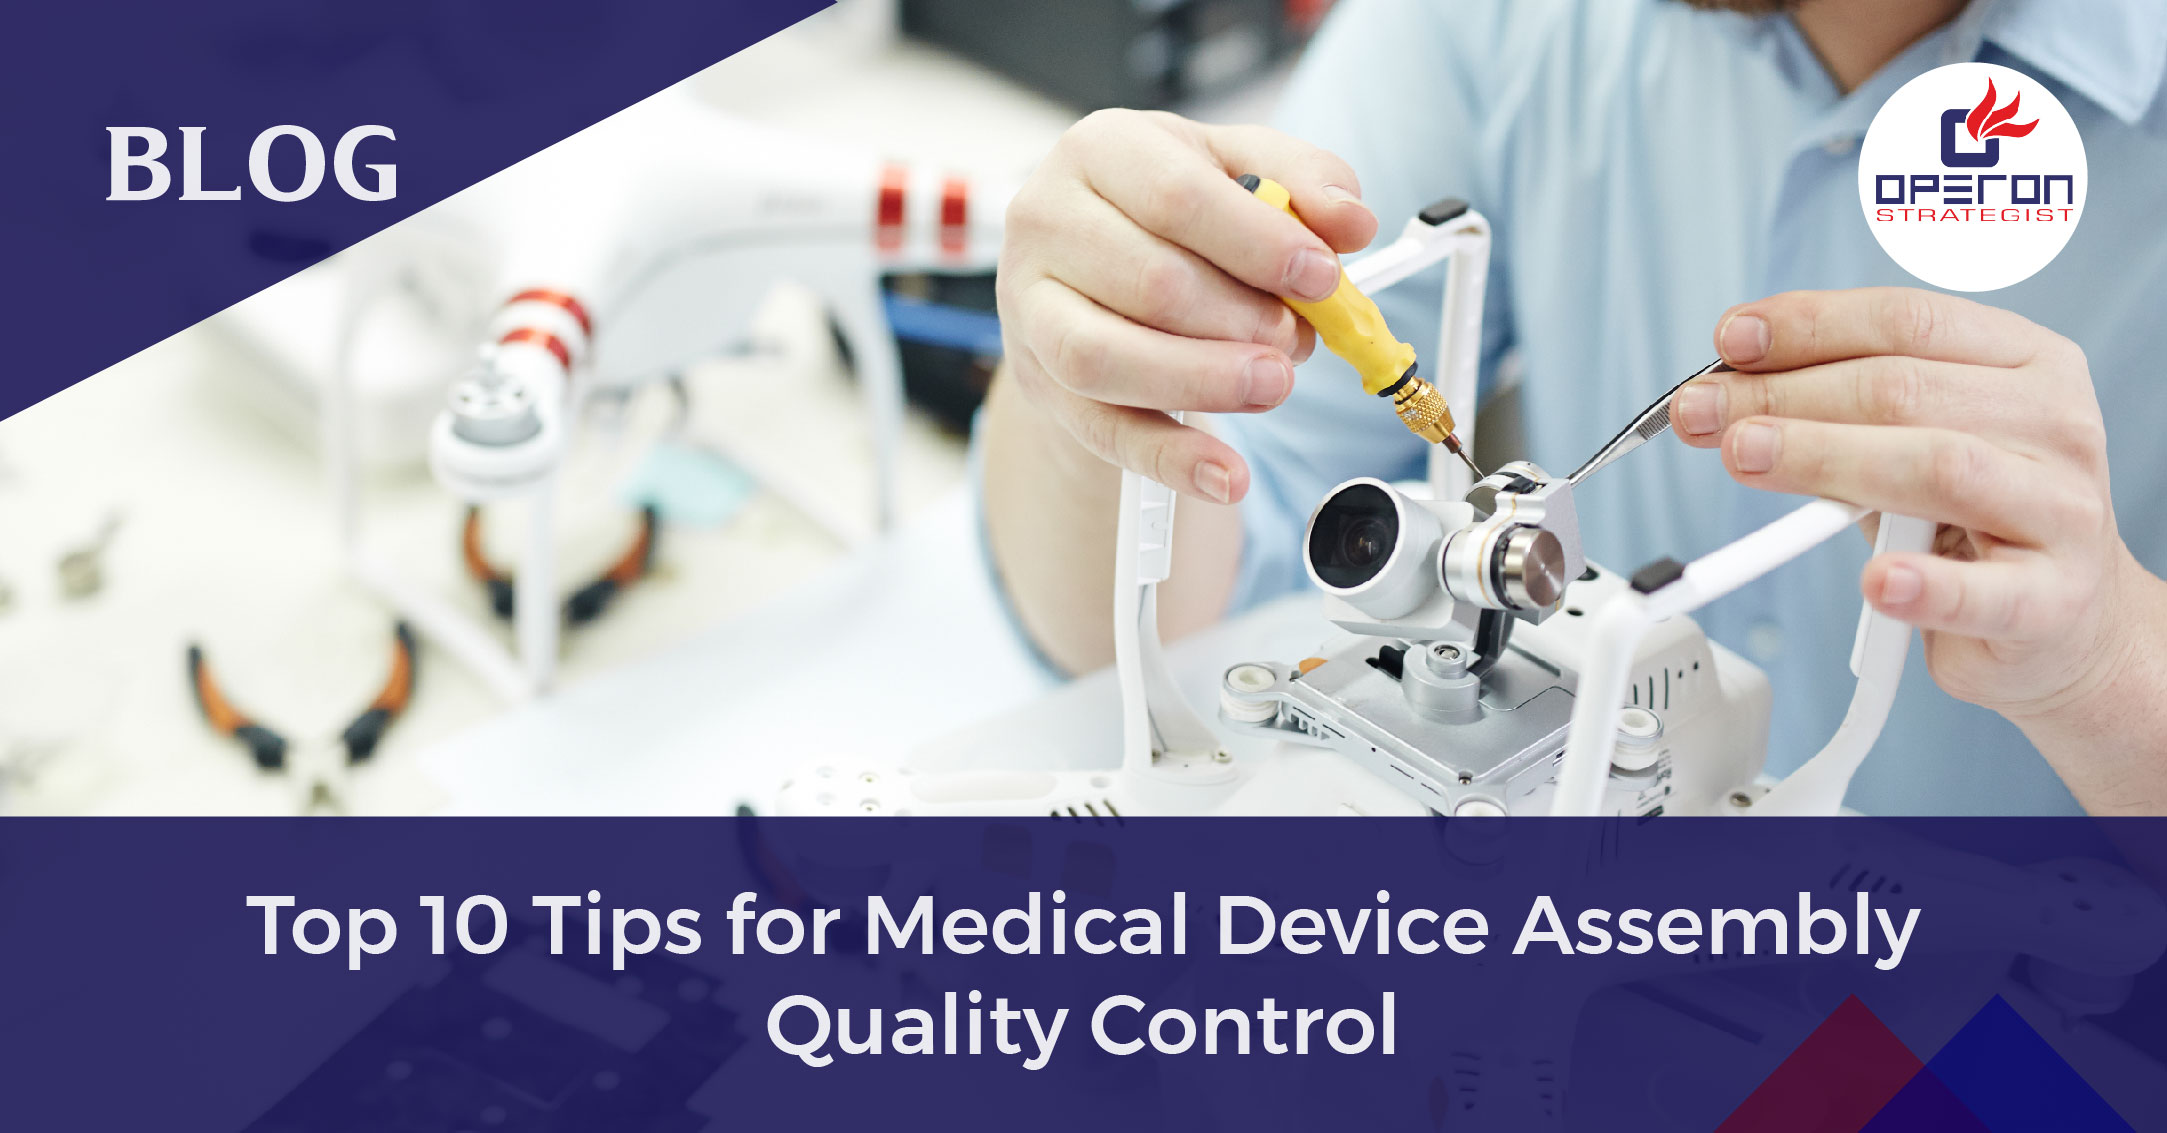 Medical Device Assembly Quality Control